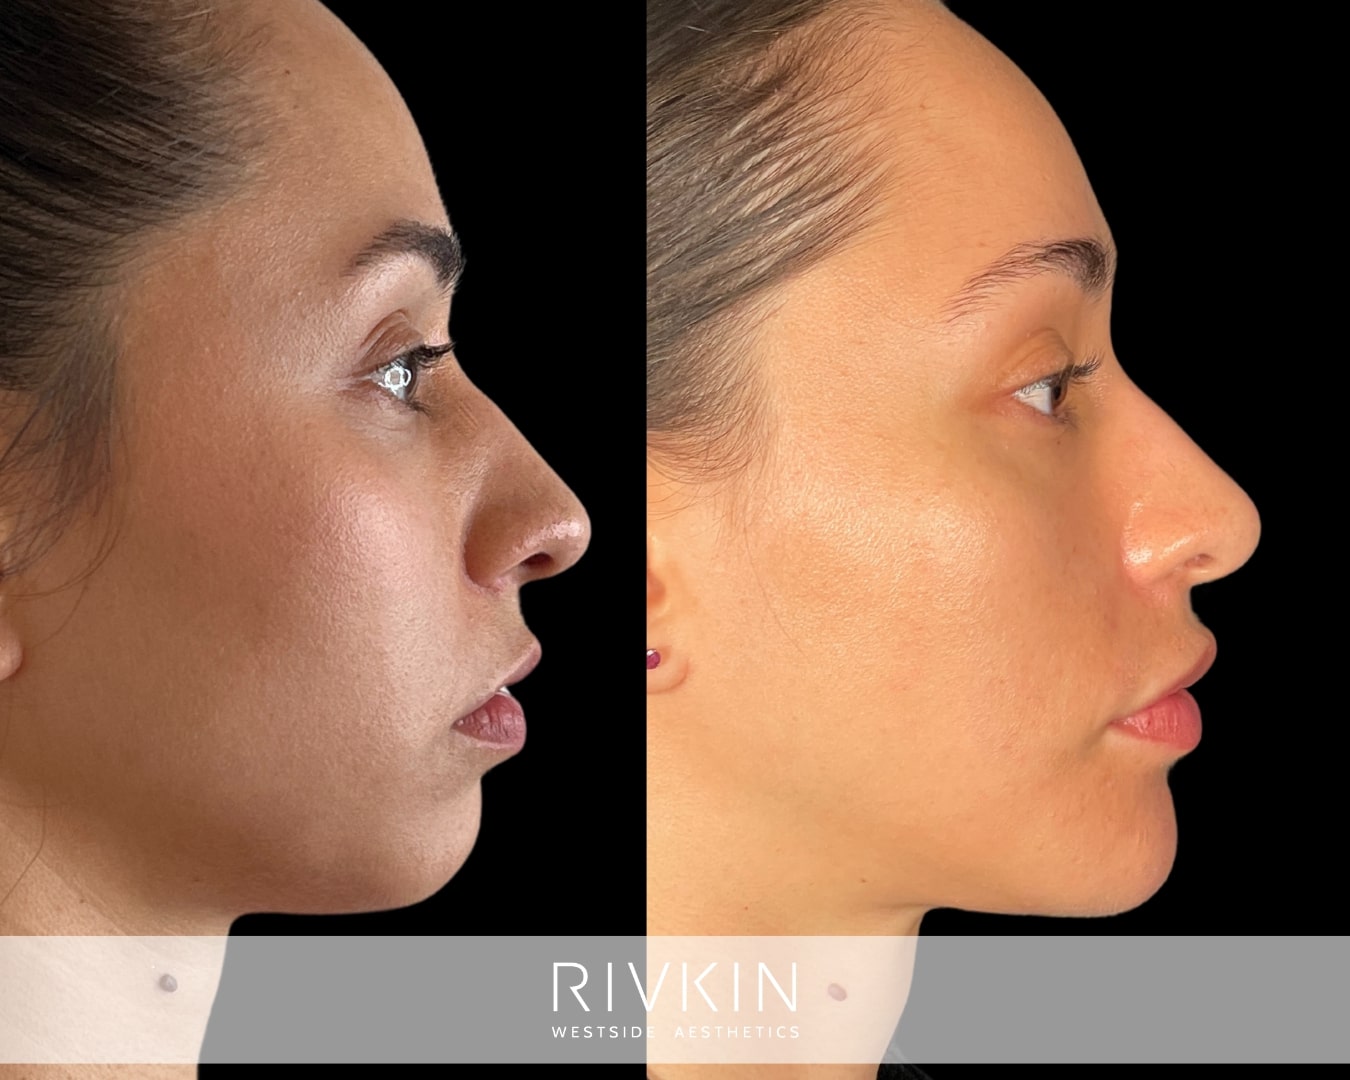 This patient got chin filler injection, liquid rhinoplasty and a little bit of lip filler. All these treatments together helped create a well-balanced, harmonious profile.